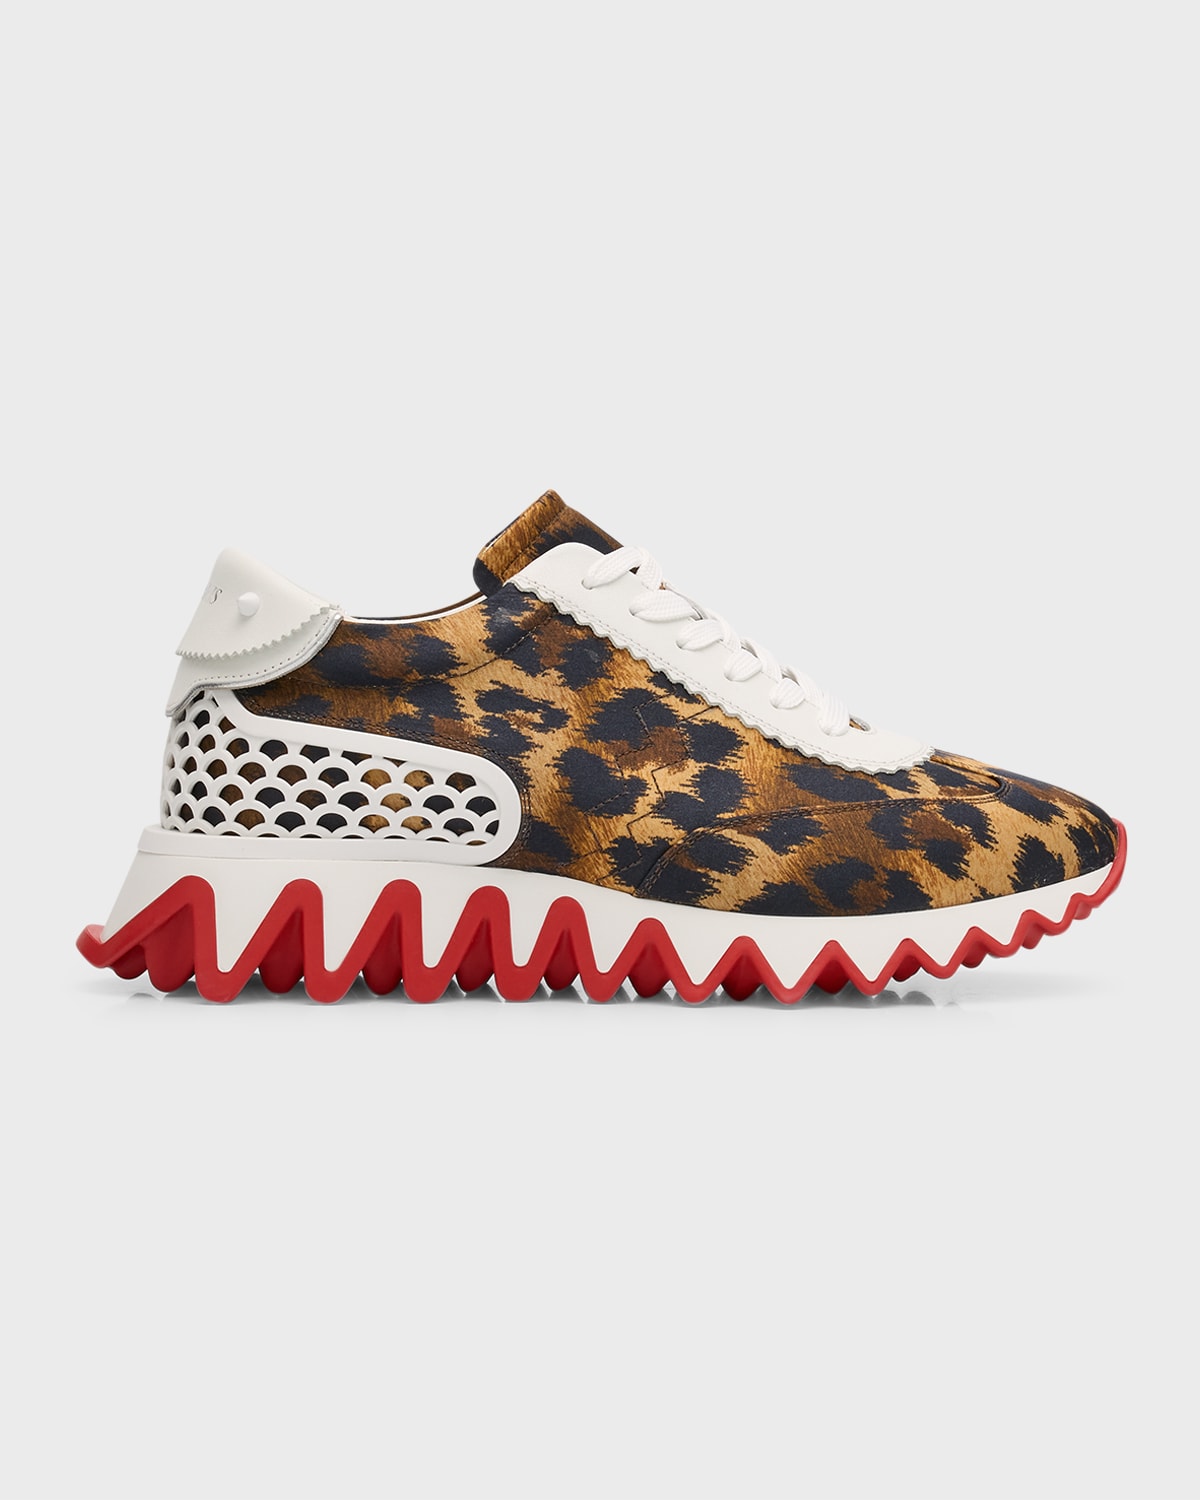 CHRISTIAN LOUBOUTIN LOUBISHARK DONNA CREPE SATIN KITTY RED SOLE RUNNER SNEAKERS